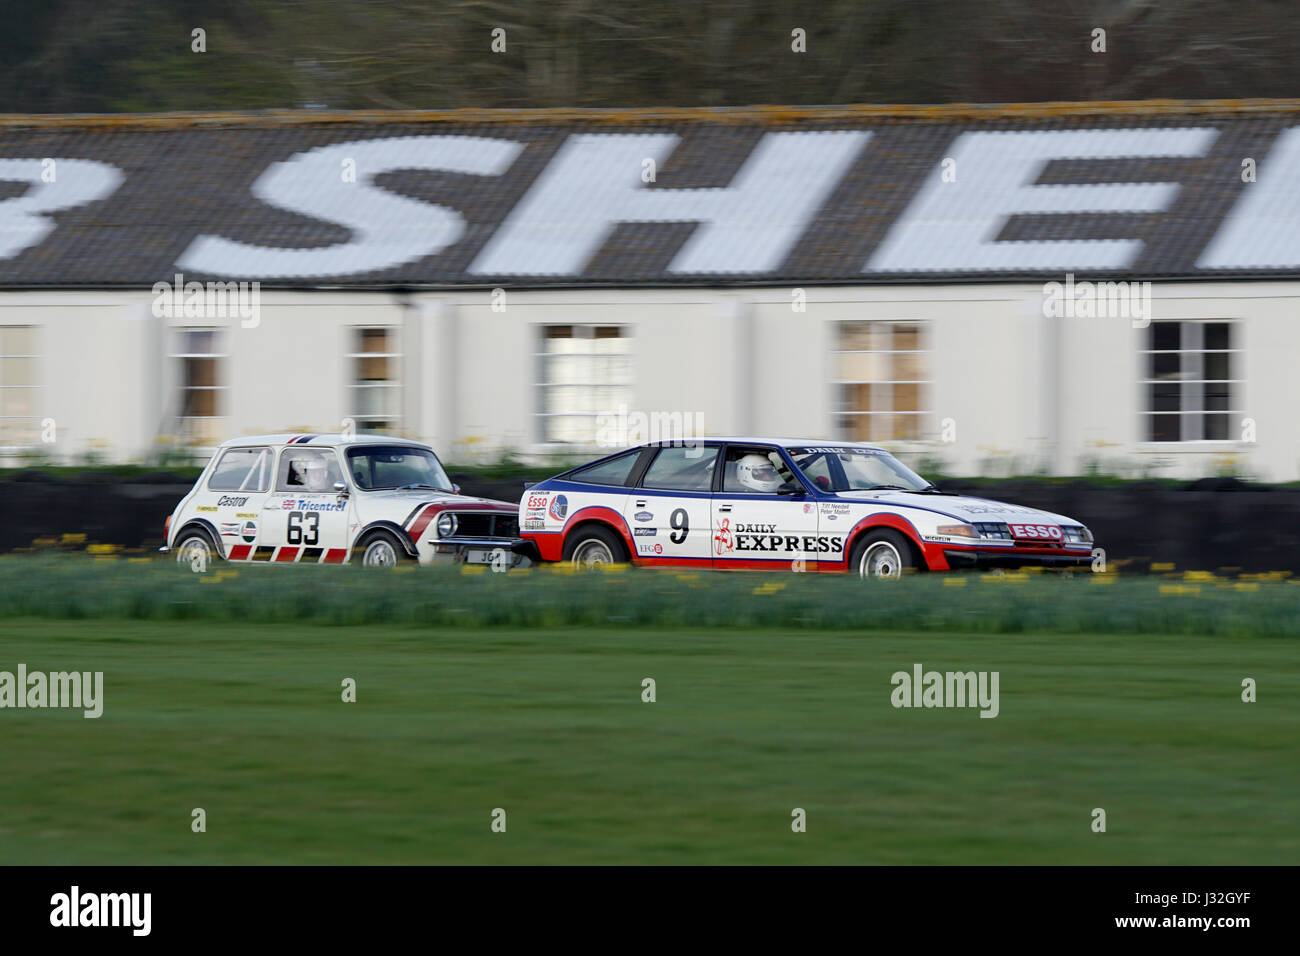 The Rover 3500 of Peter Mallett and Tiff Needell under pressure from the Mini 1275GT of Jon Mowatt and Glynn Swift at 75th Goodwood Members Meeting Stock Photo